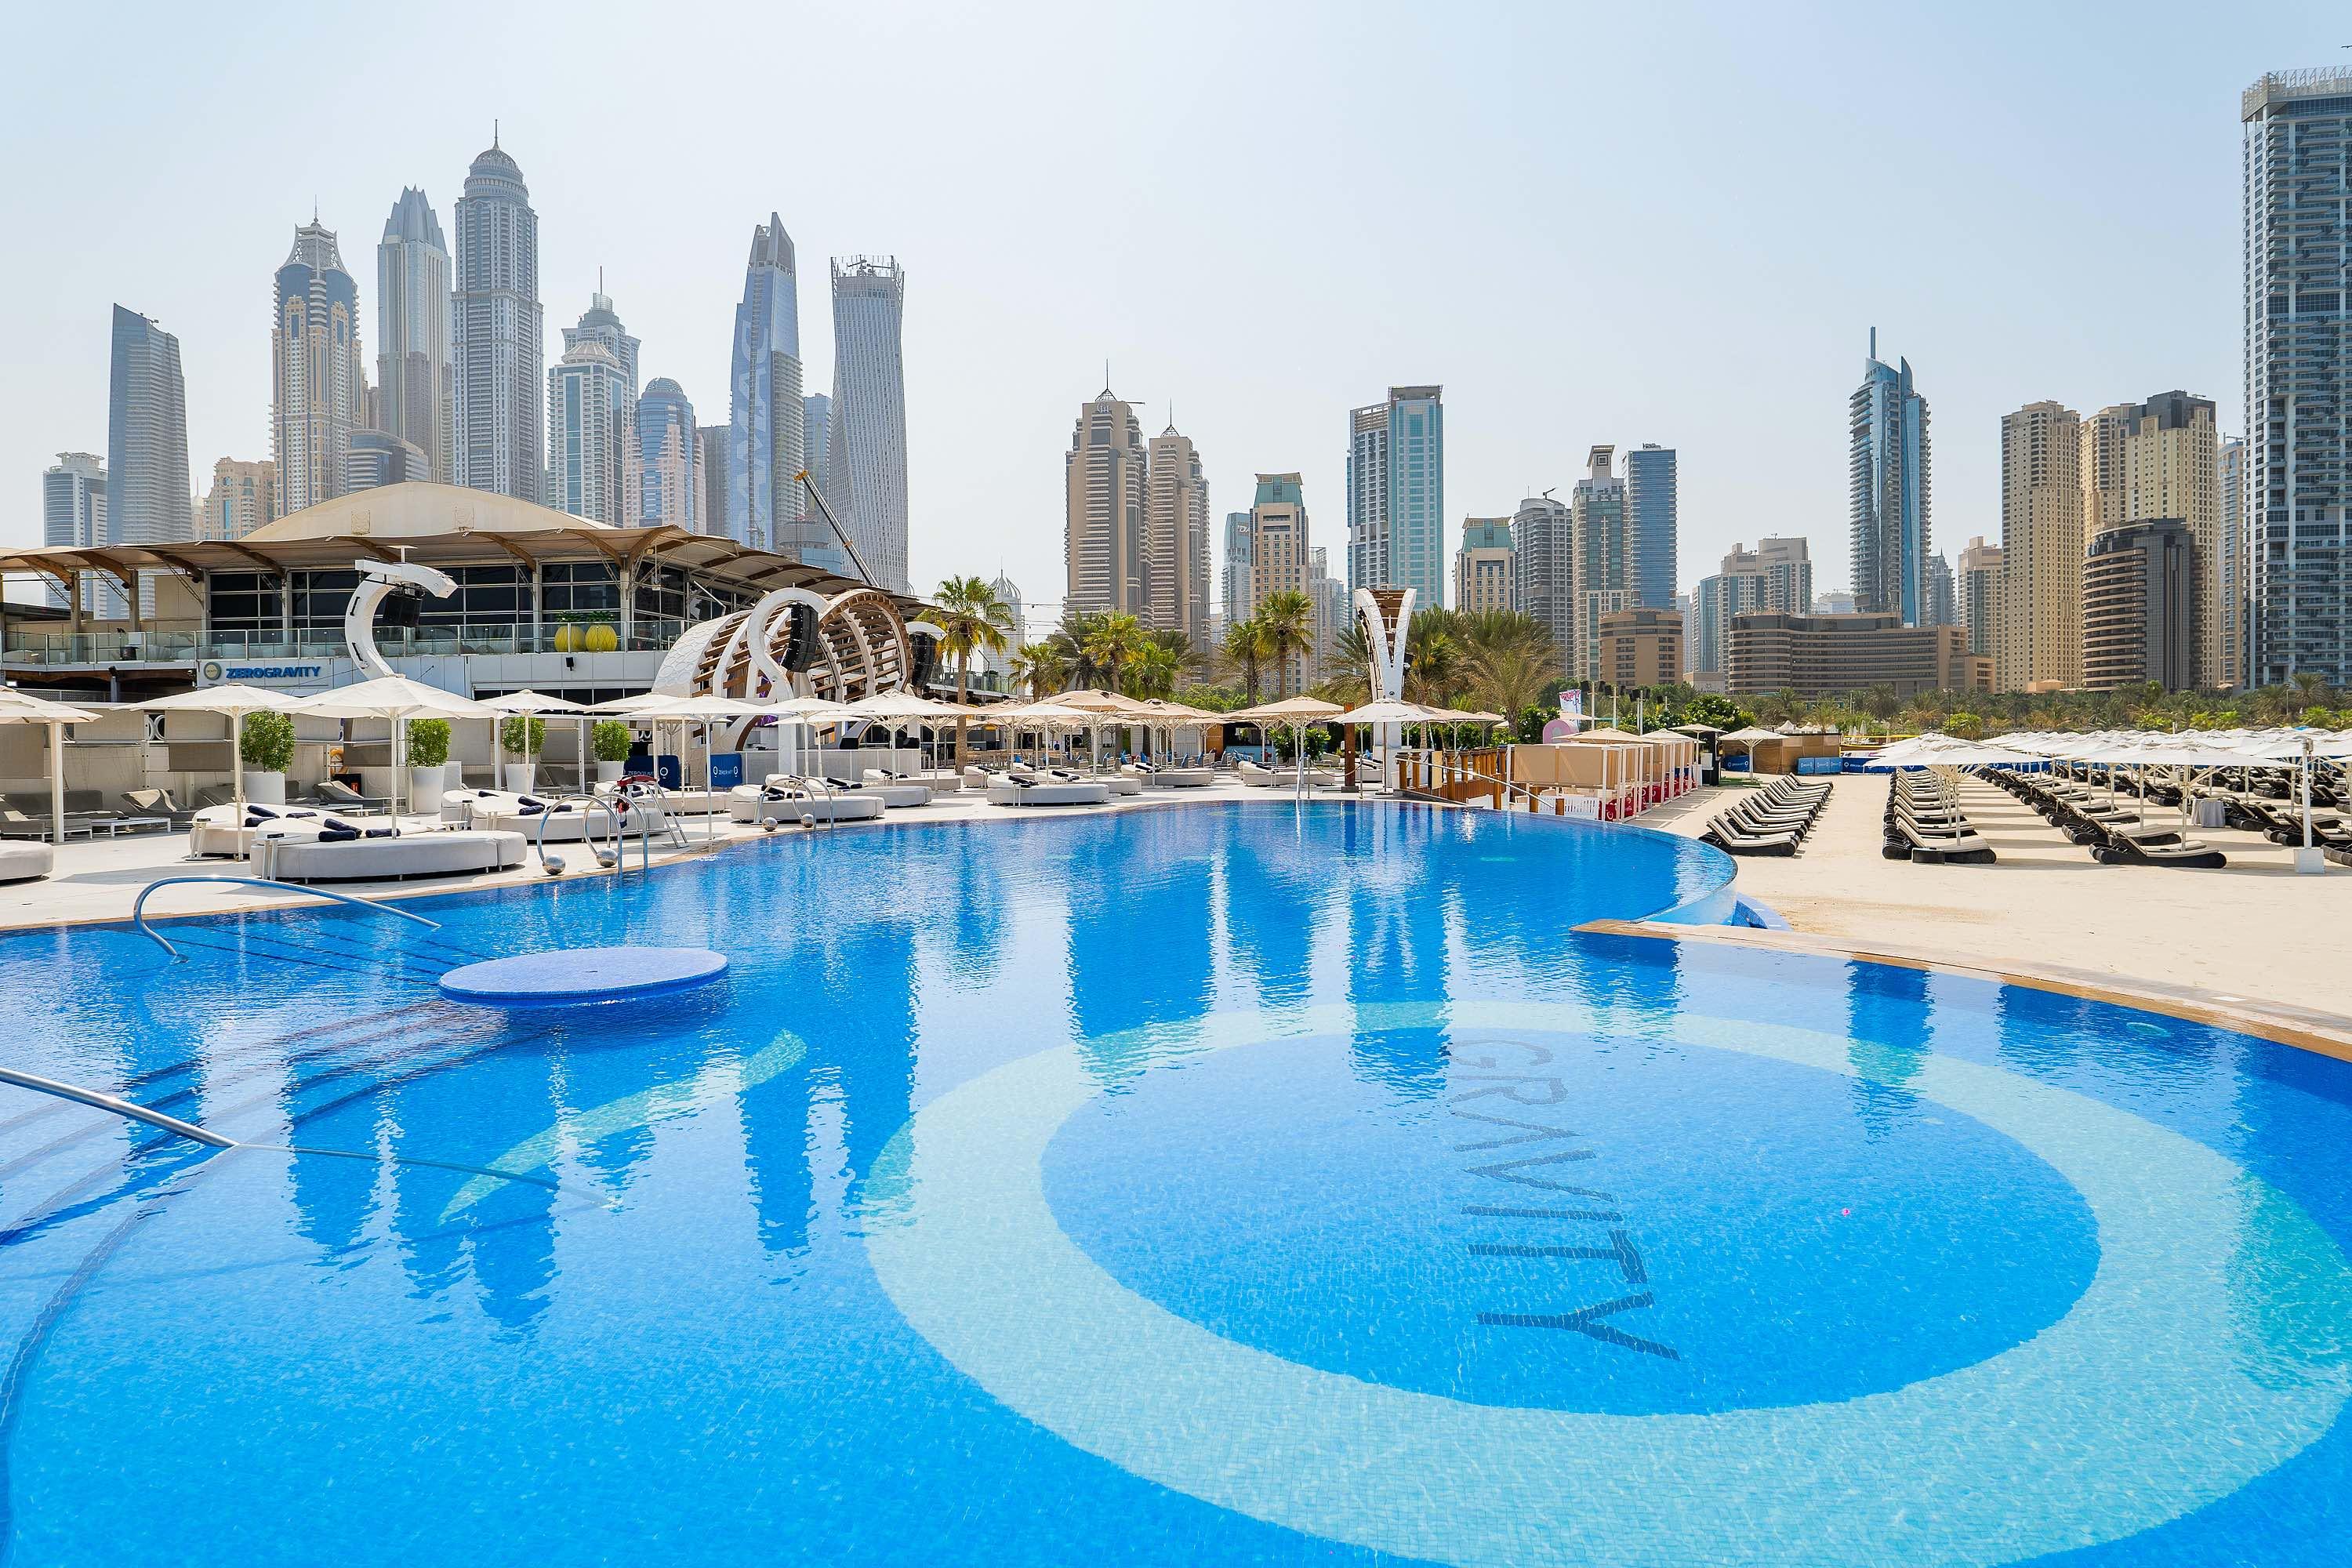 ZERO GRAVITY DUBAI: 2 NEW PARTY BRUNCHES WITH BEACH & POOL ACCESS LAUNCHED!